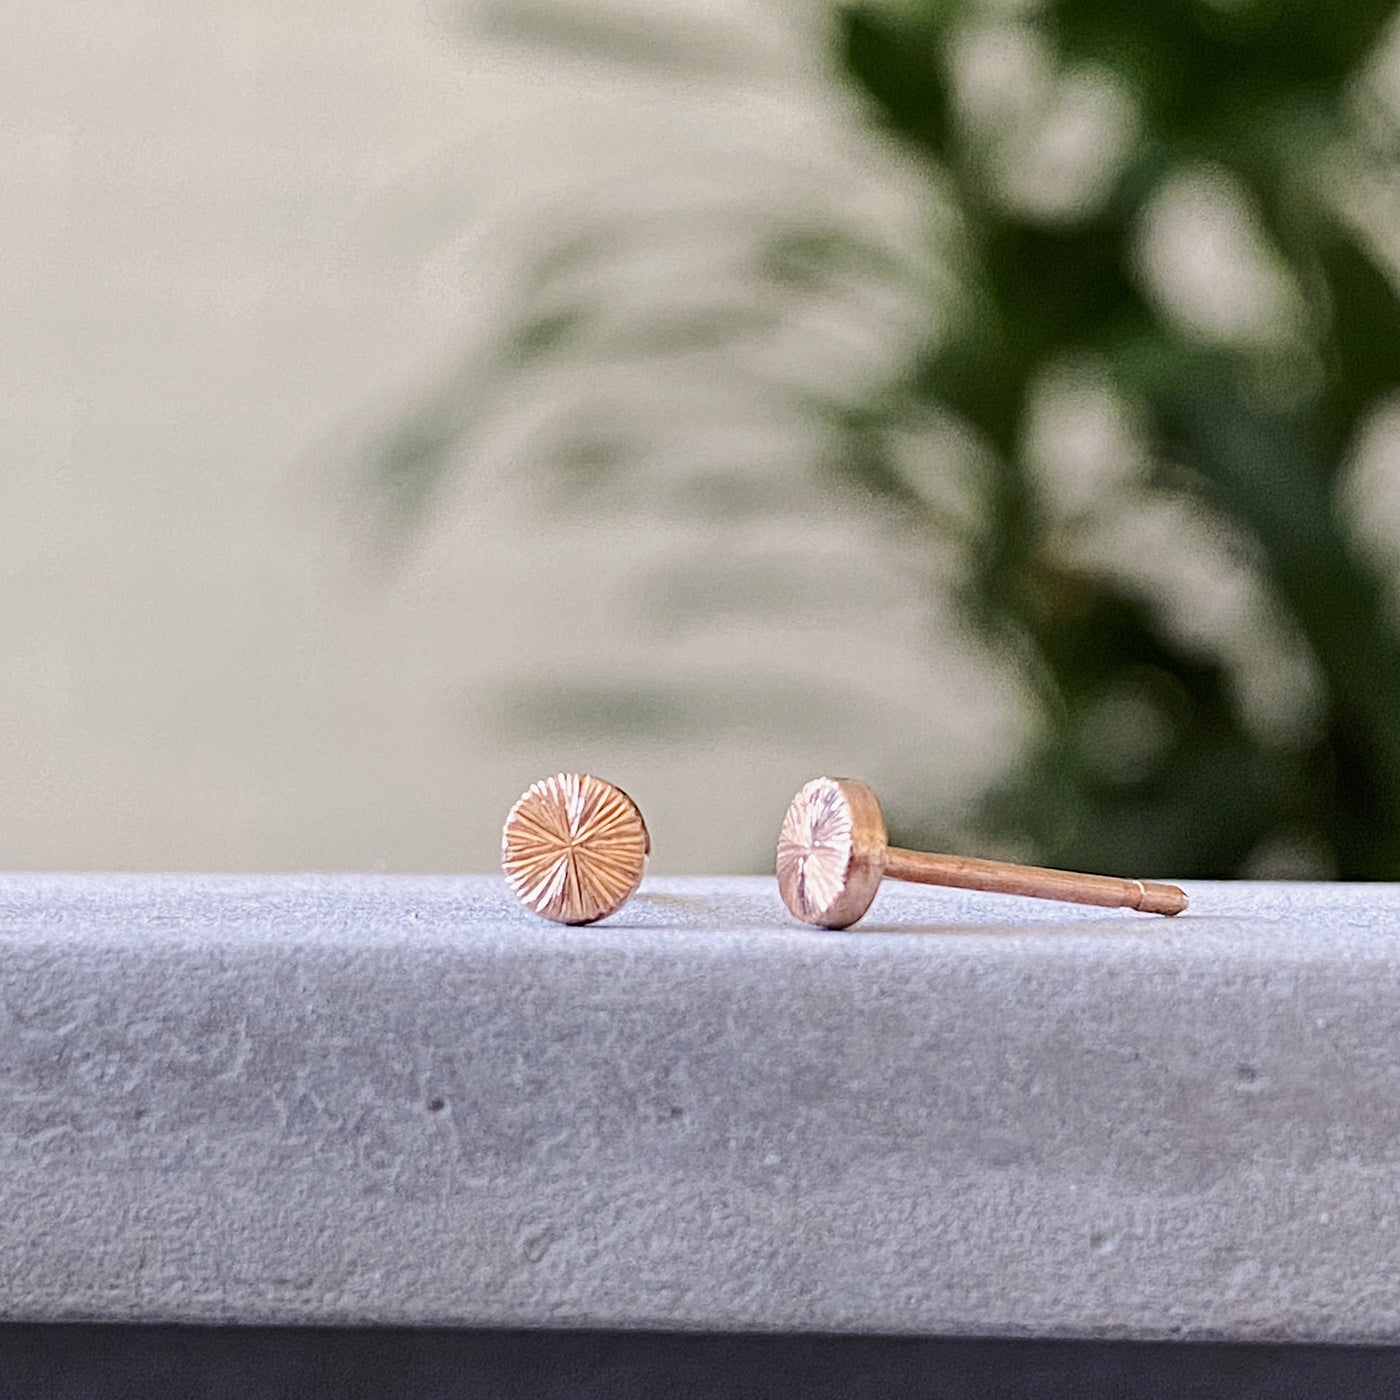 round rose gold stud earrings with sunburst engraving side view